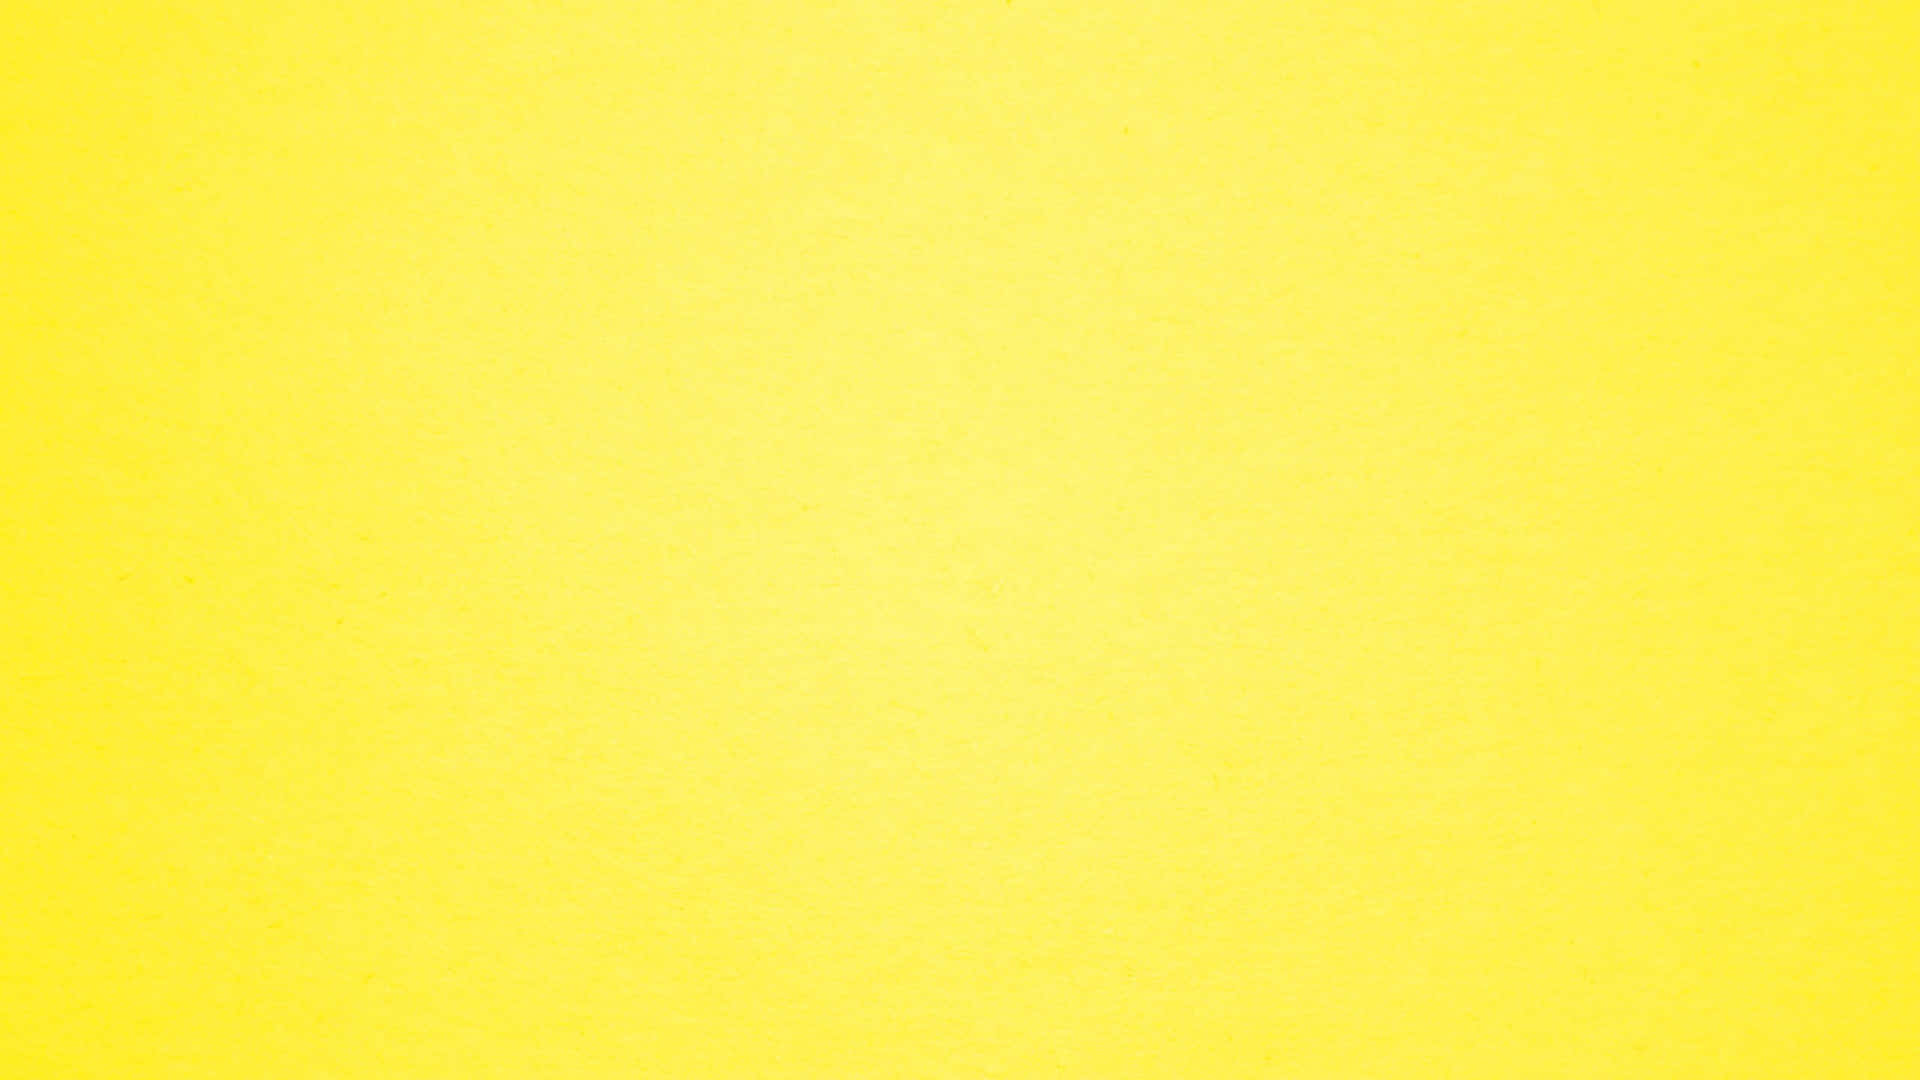 Download Solid Yellow | Wallpapers.com